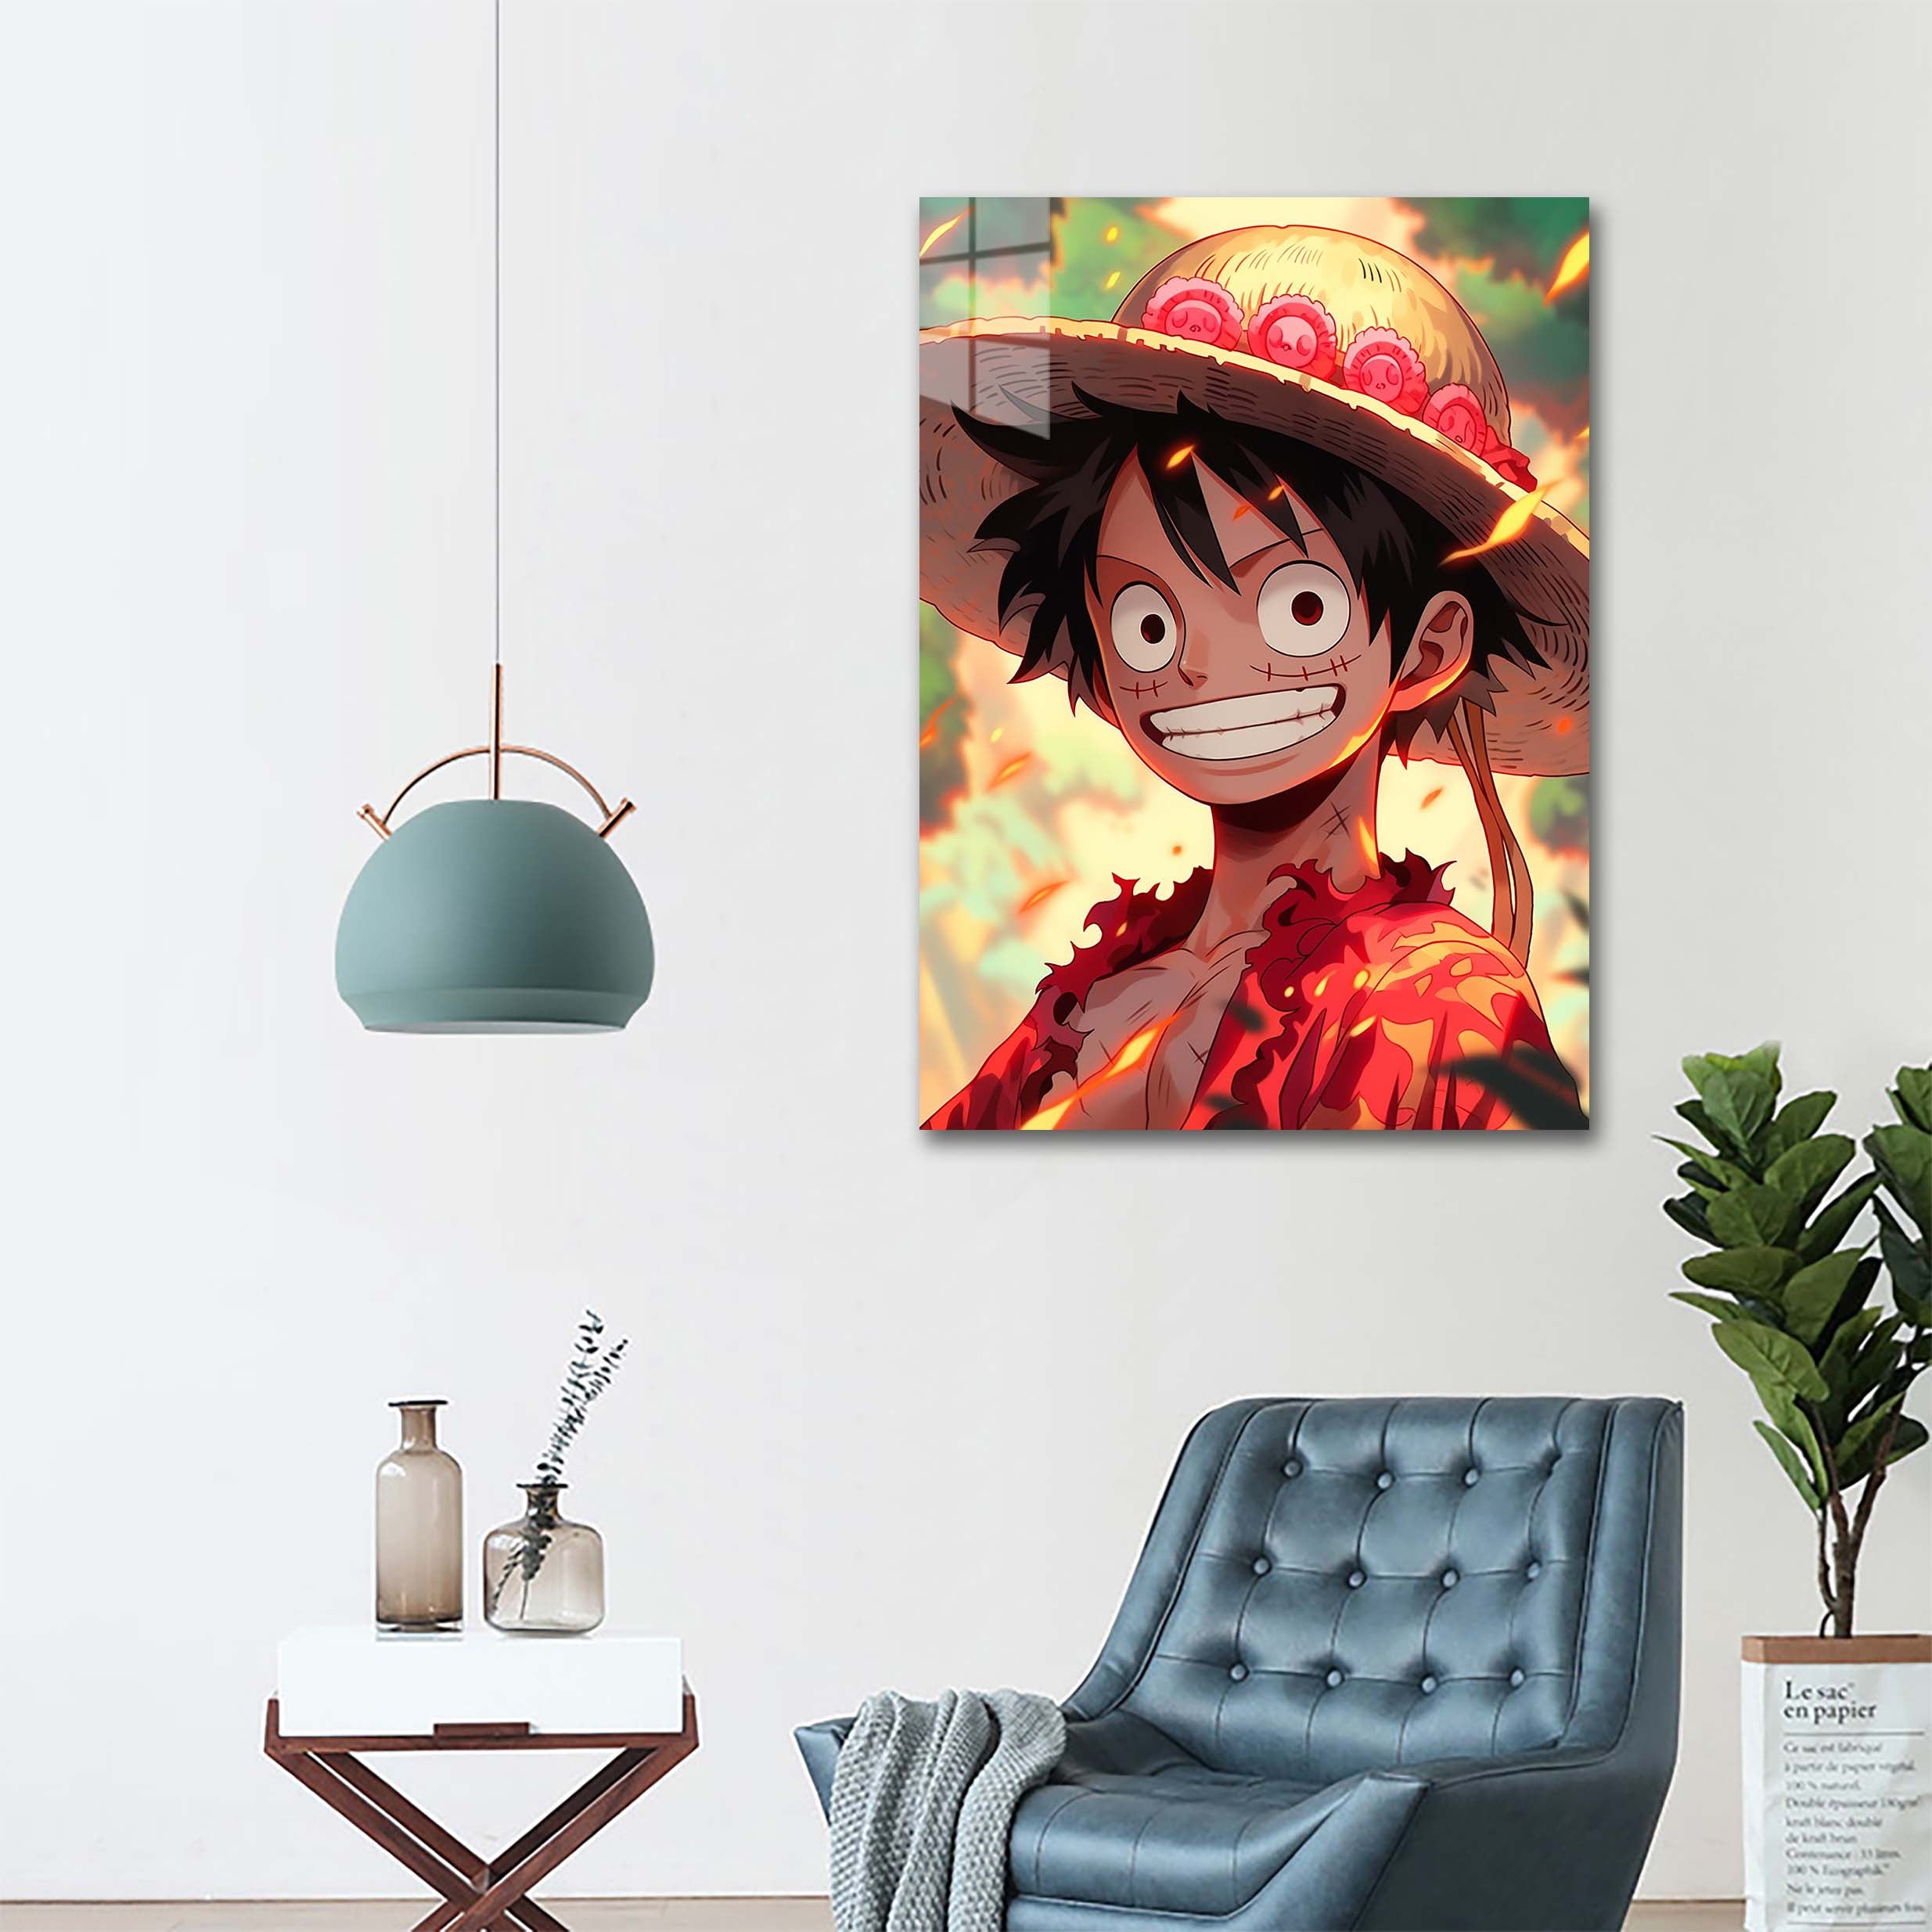 Luffy_2-designed by @ Jikuanime